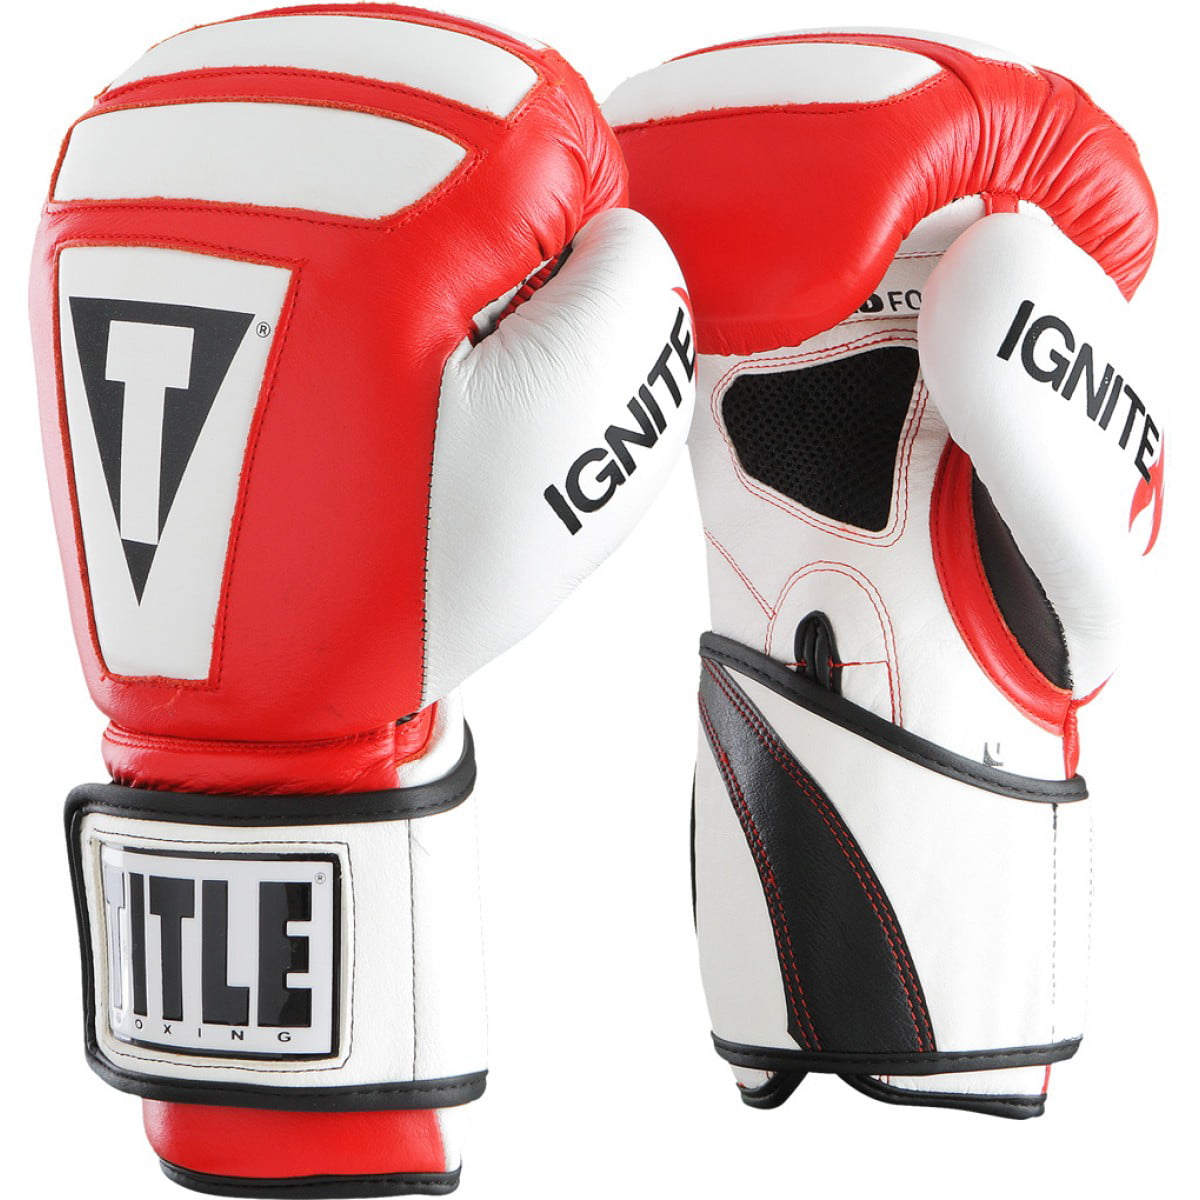 Black/White/Red Title Boxing Infused Foam Enthrall Hook & Loop Training Gloves 